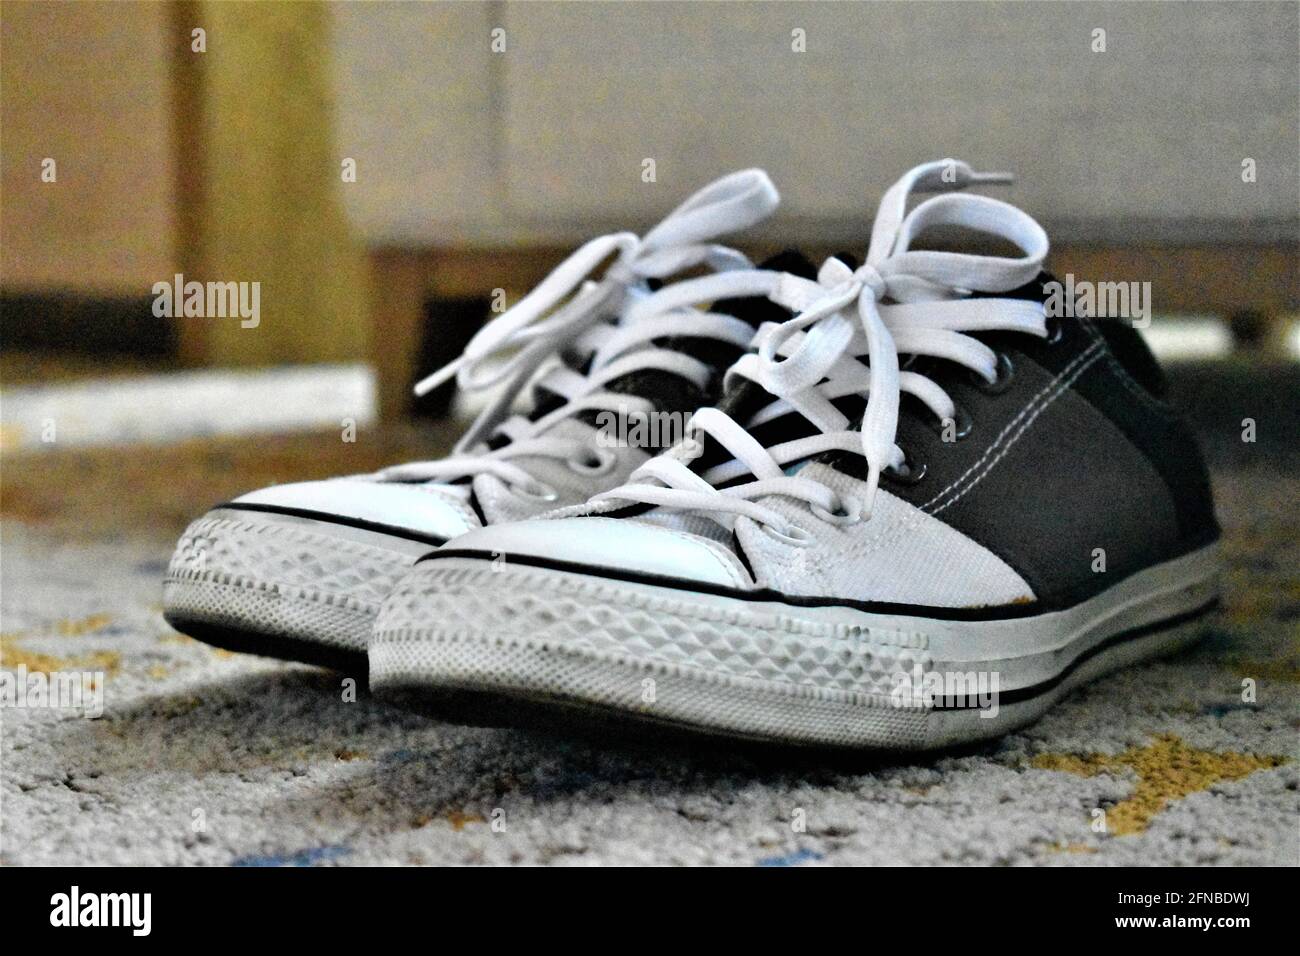 A pair of white and gray sneakers with shoelaces tied Stock Photo